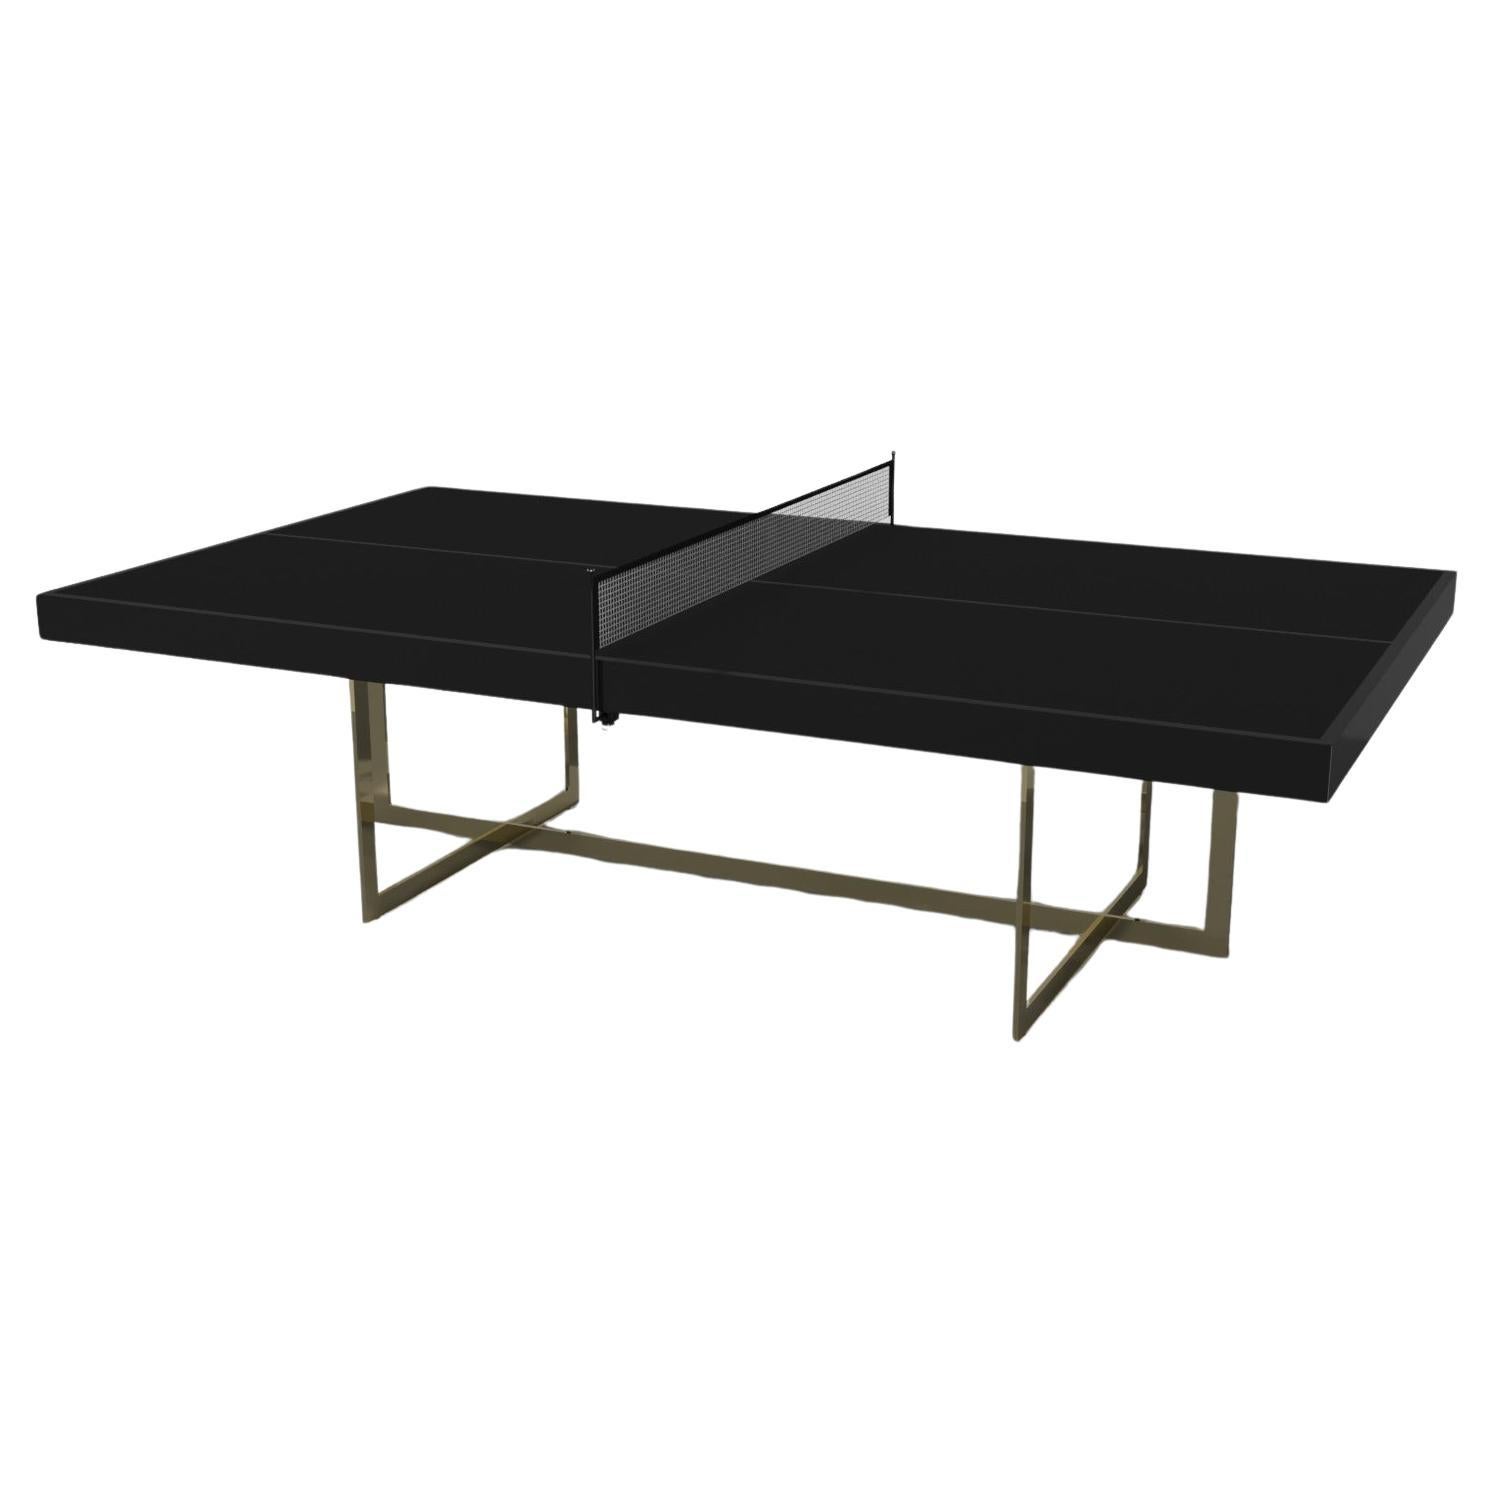 Elevate Customs Beso Tennis Table /Brass Stainless Steel Metal in 9'-Made in USA